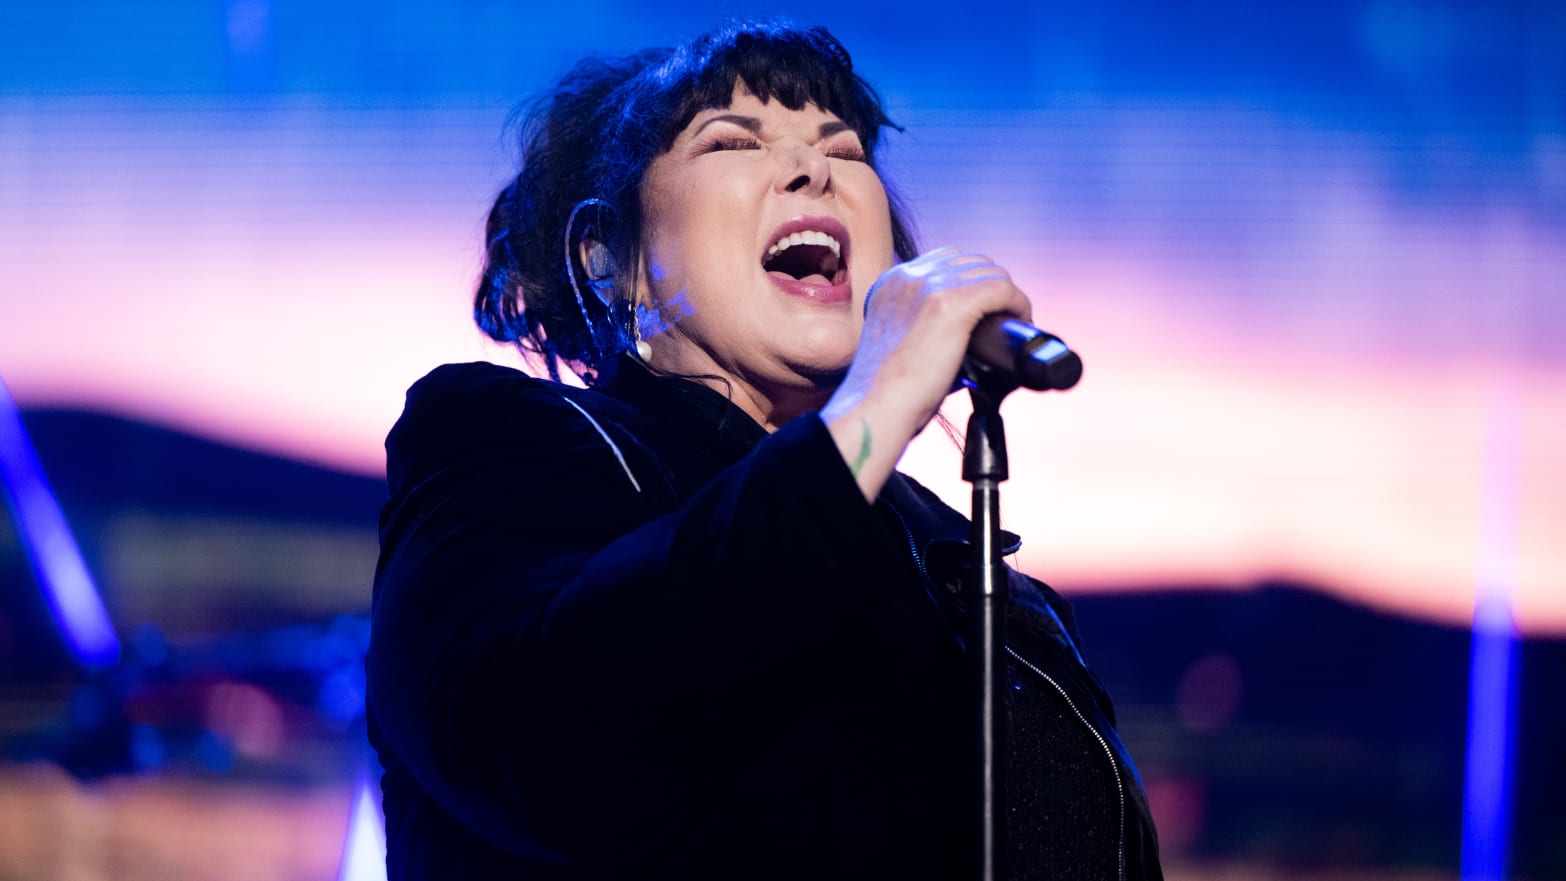 Rock and Roll Hall of Fame member Ann Wilson, singer of the classic rock band Heart, performs onstage.